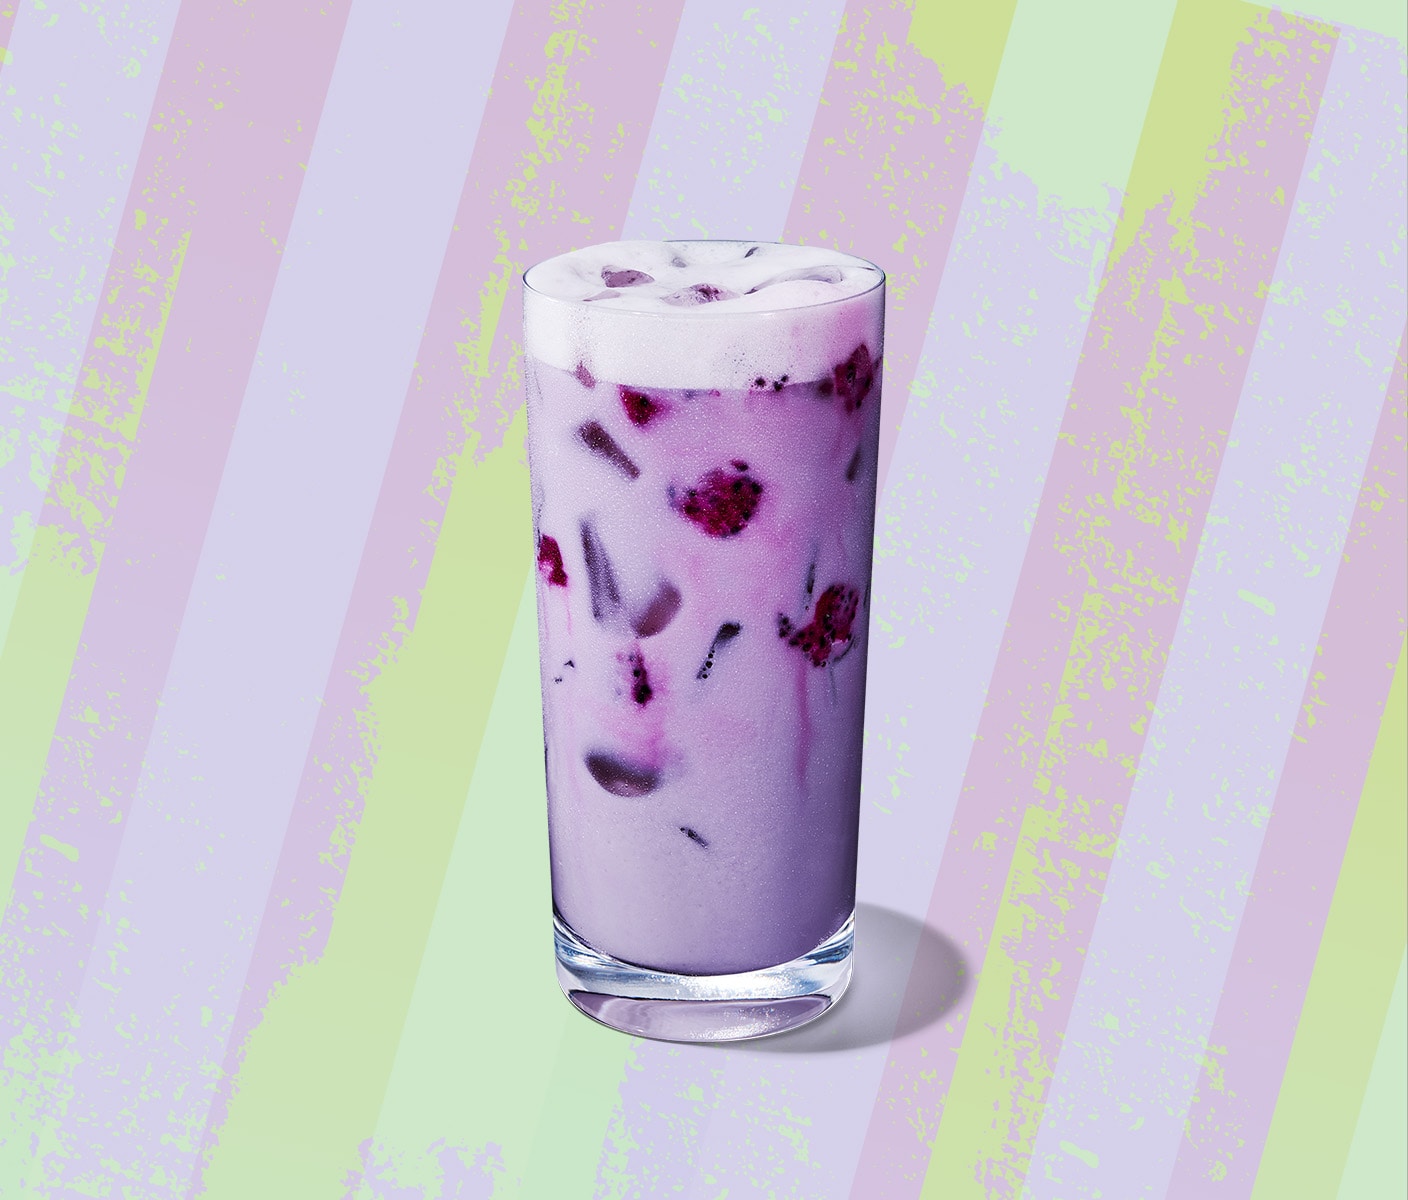 A creamy, light purple iced drink with pieces of dragonfruit.